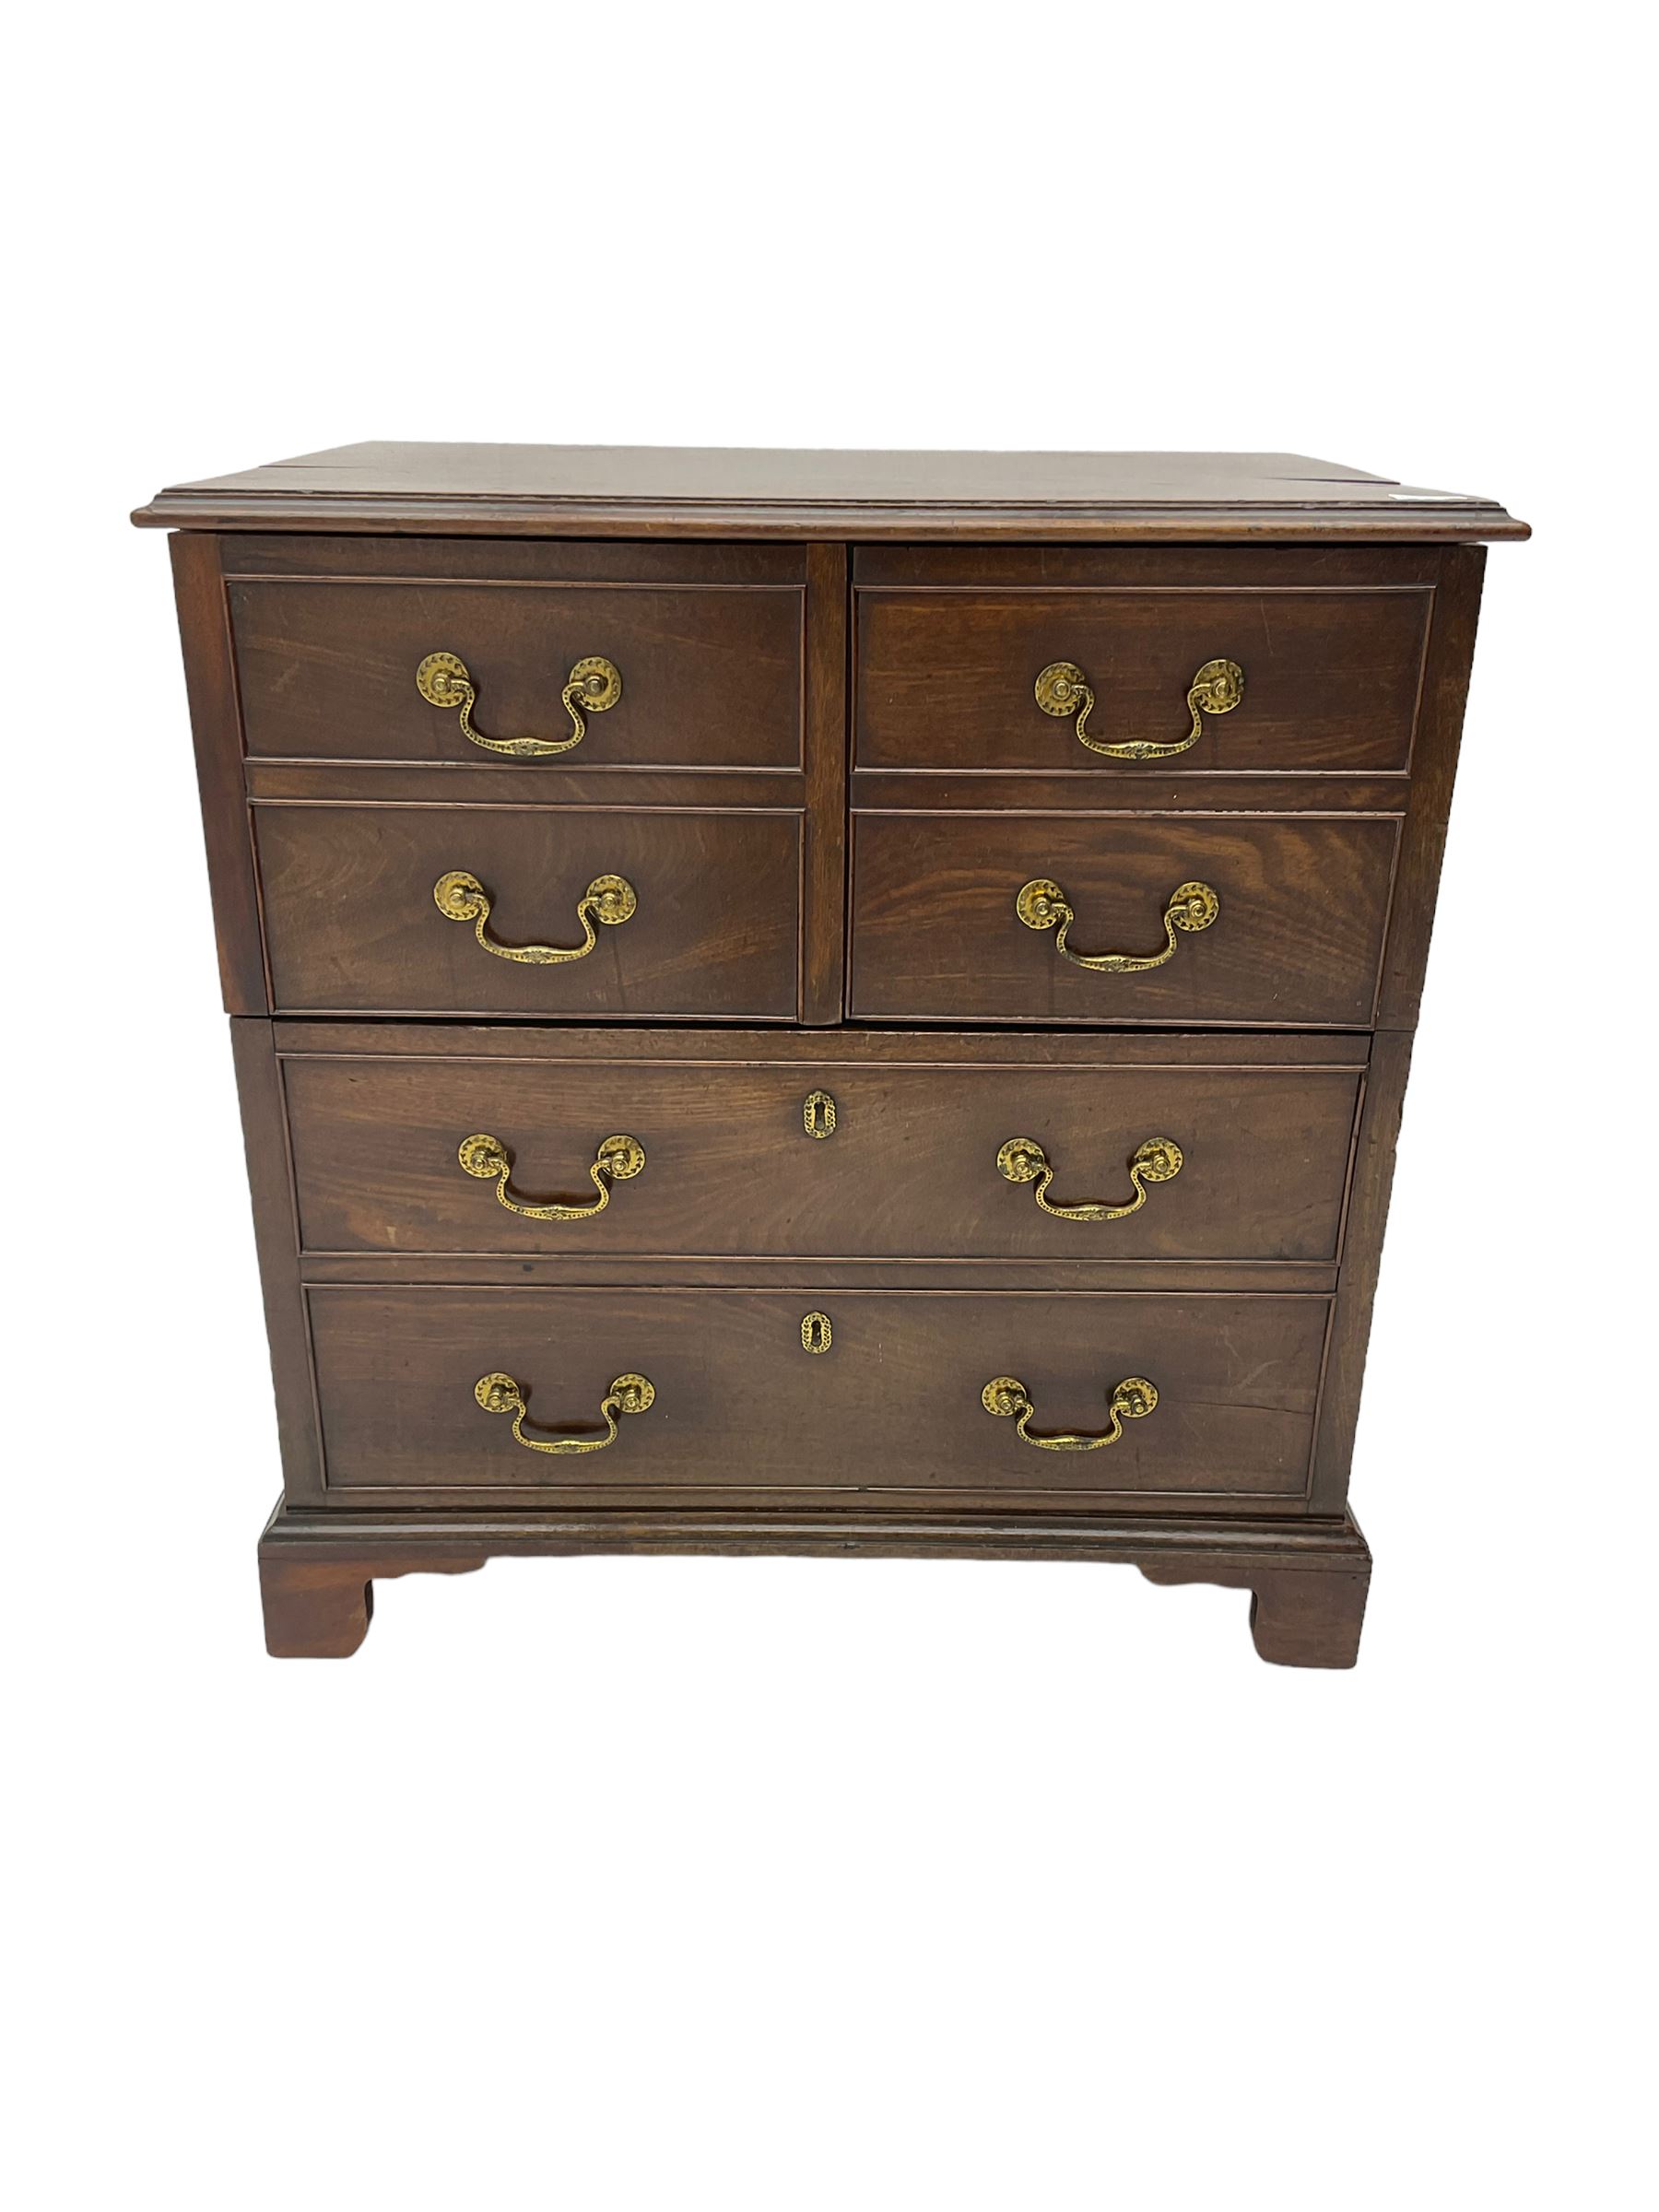 George III mahogany commode chest - Image 2 of 7